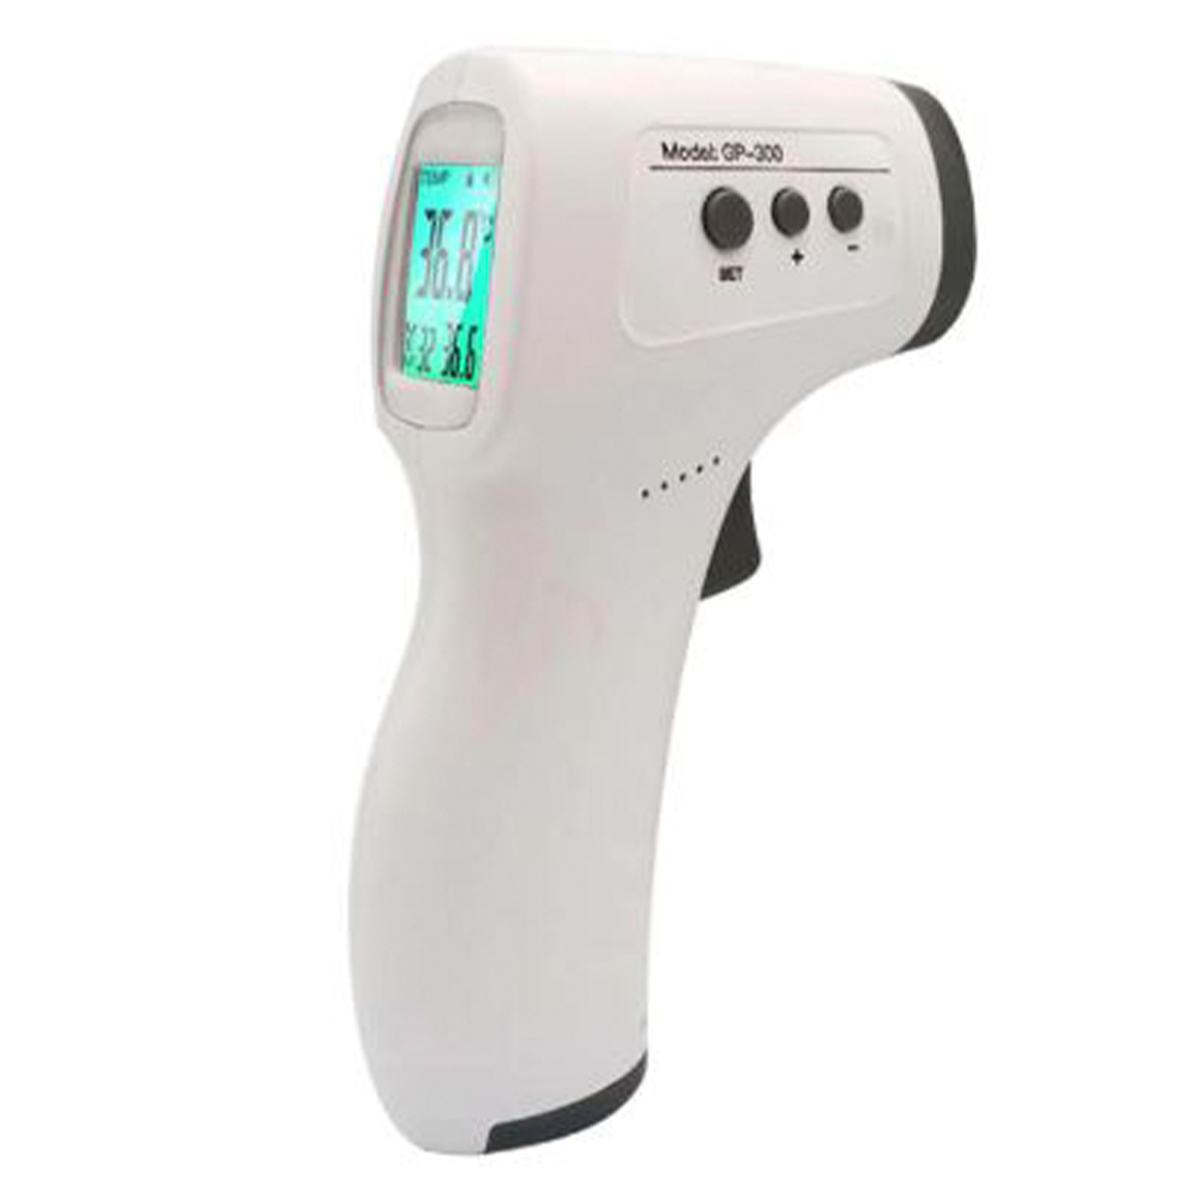 Buy Non Touch Infrared Thermometer Gp 300 Online Lulu Hypermarket Uae